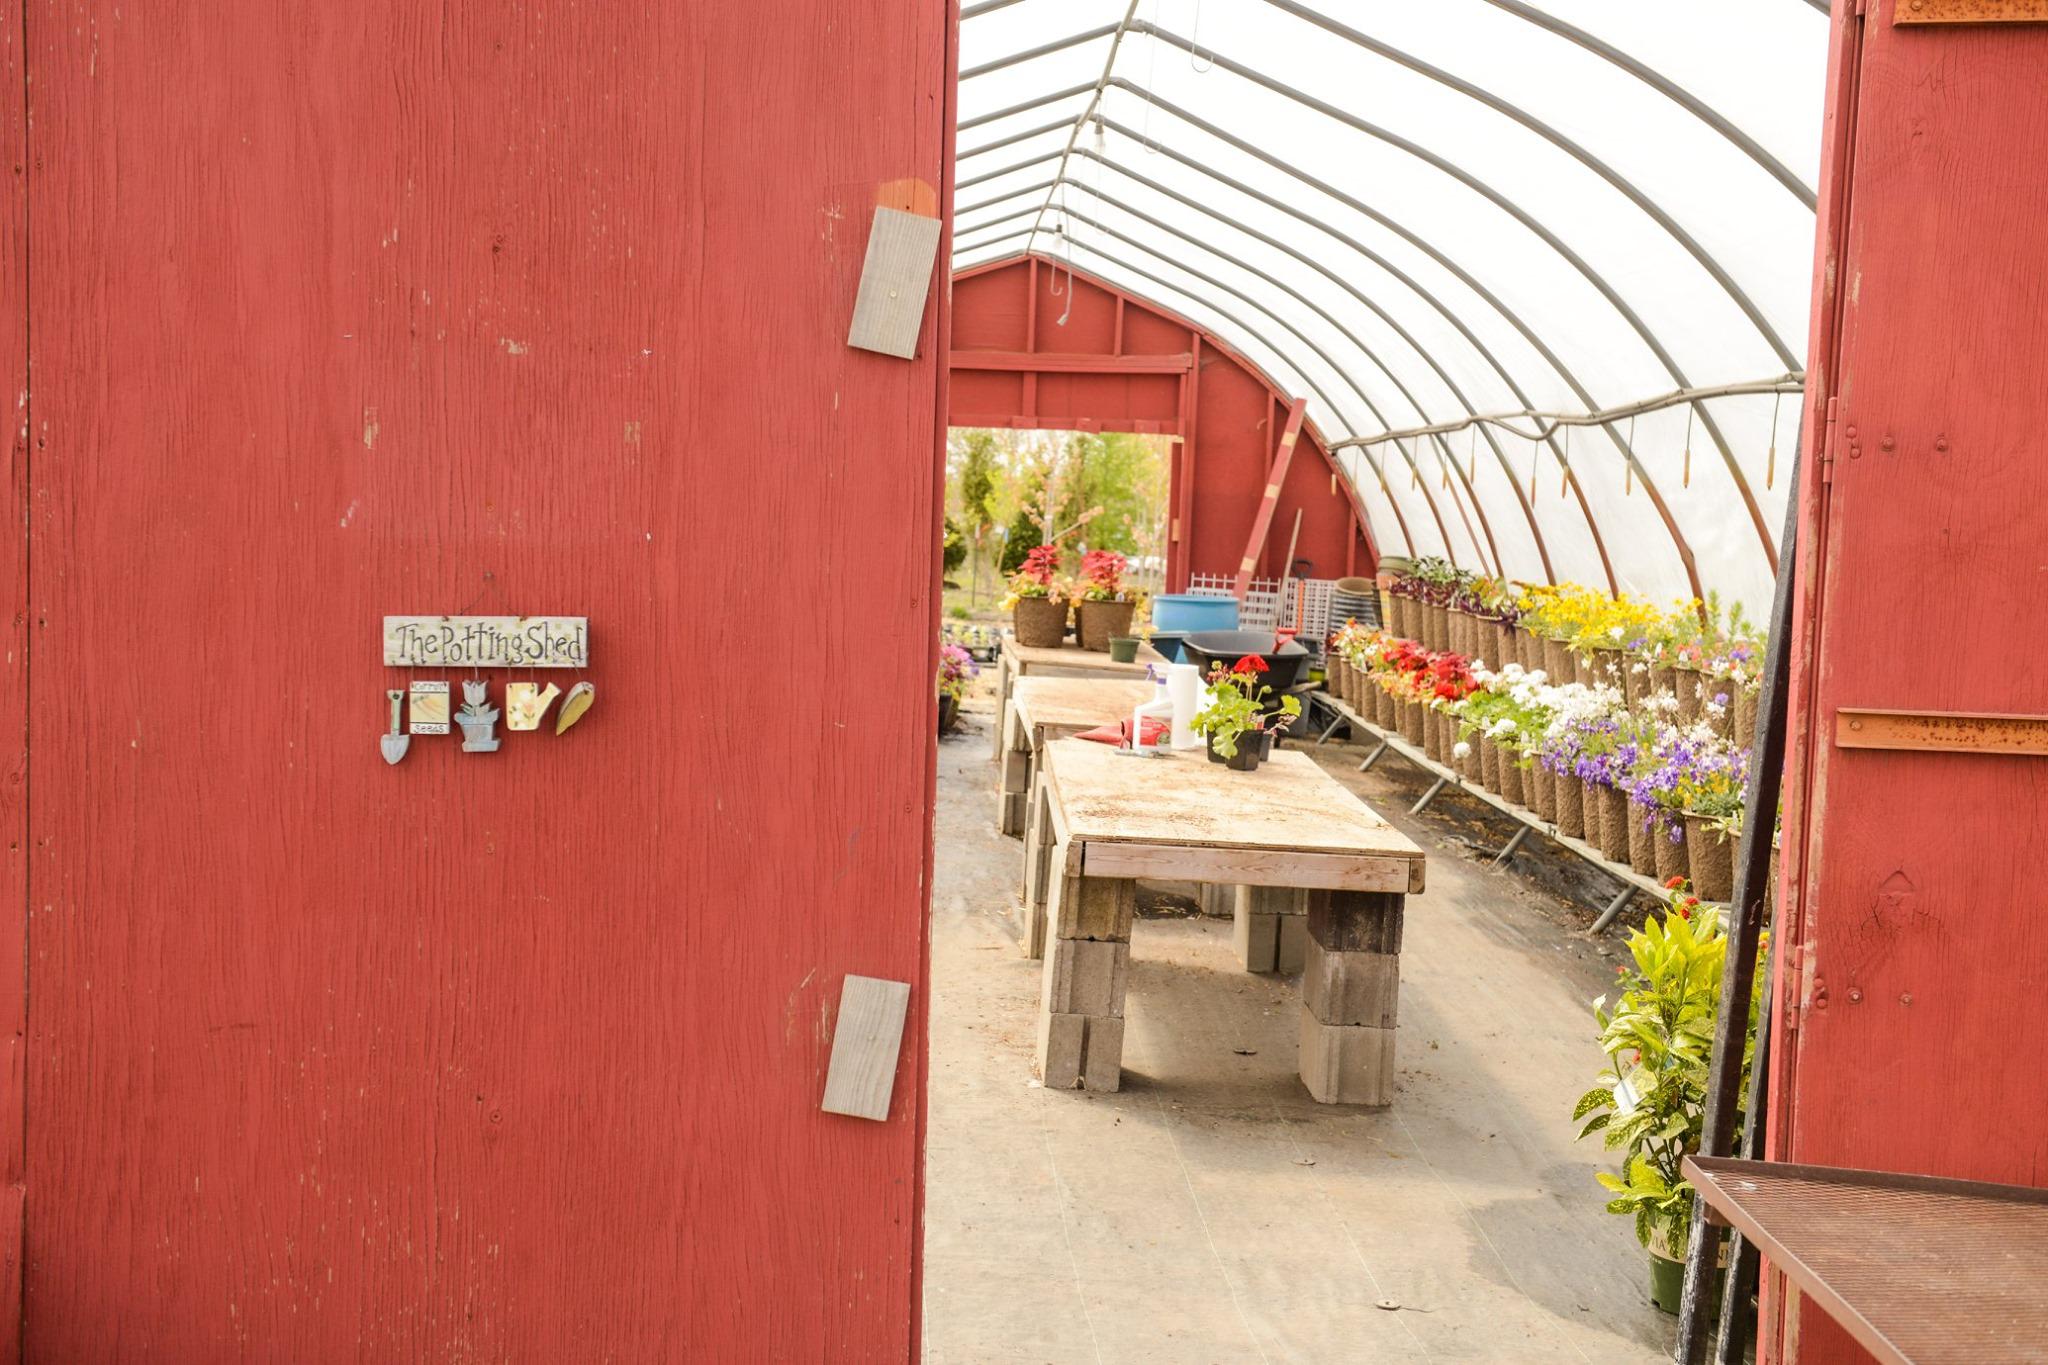 Our beautiful greenhouse at Heidi's GrowHaus & Lifestyle Gardens grows perennials, herbs, veggies, shrubs, evergreens, fruit trees, and much more!